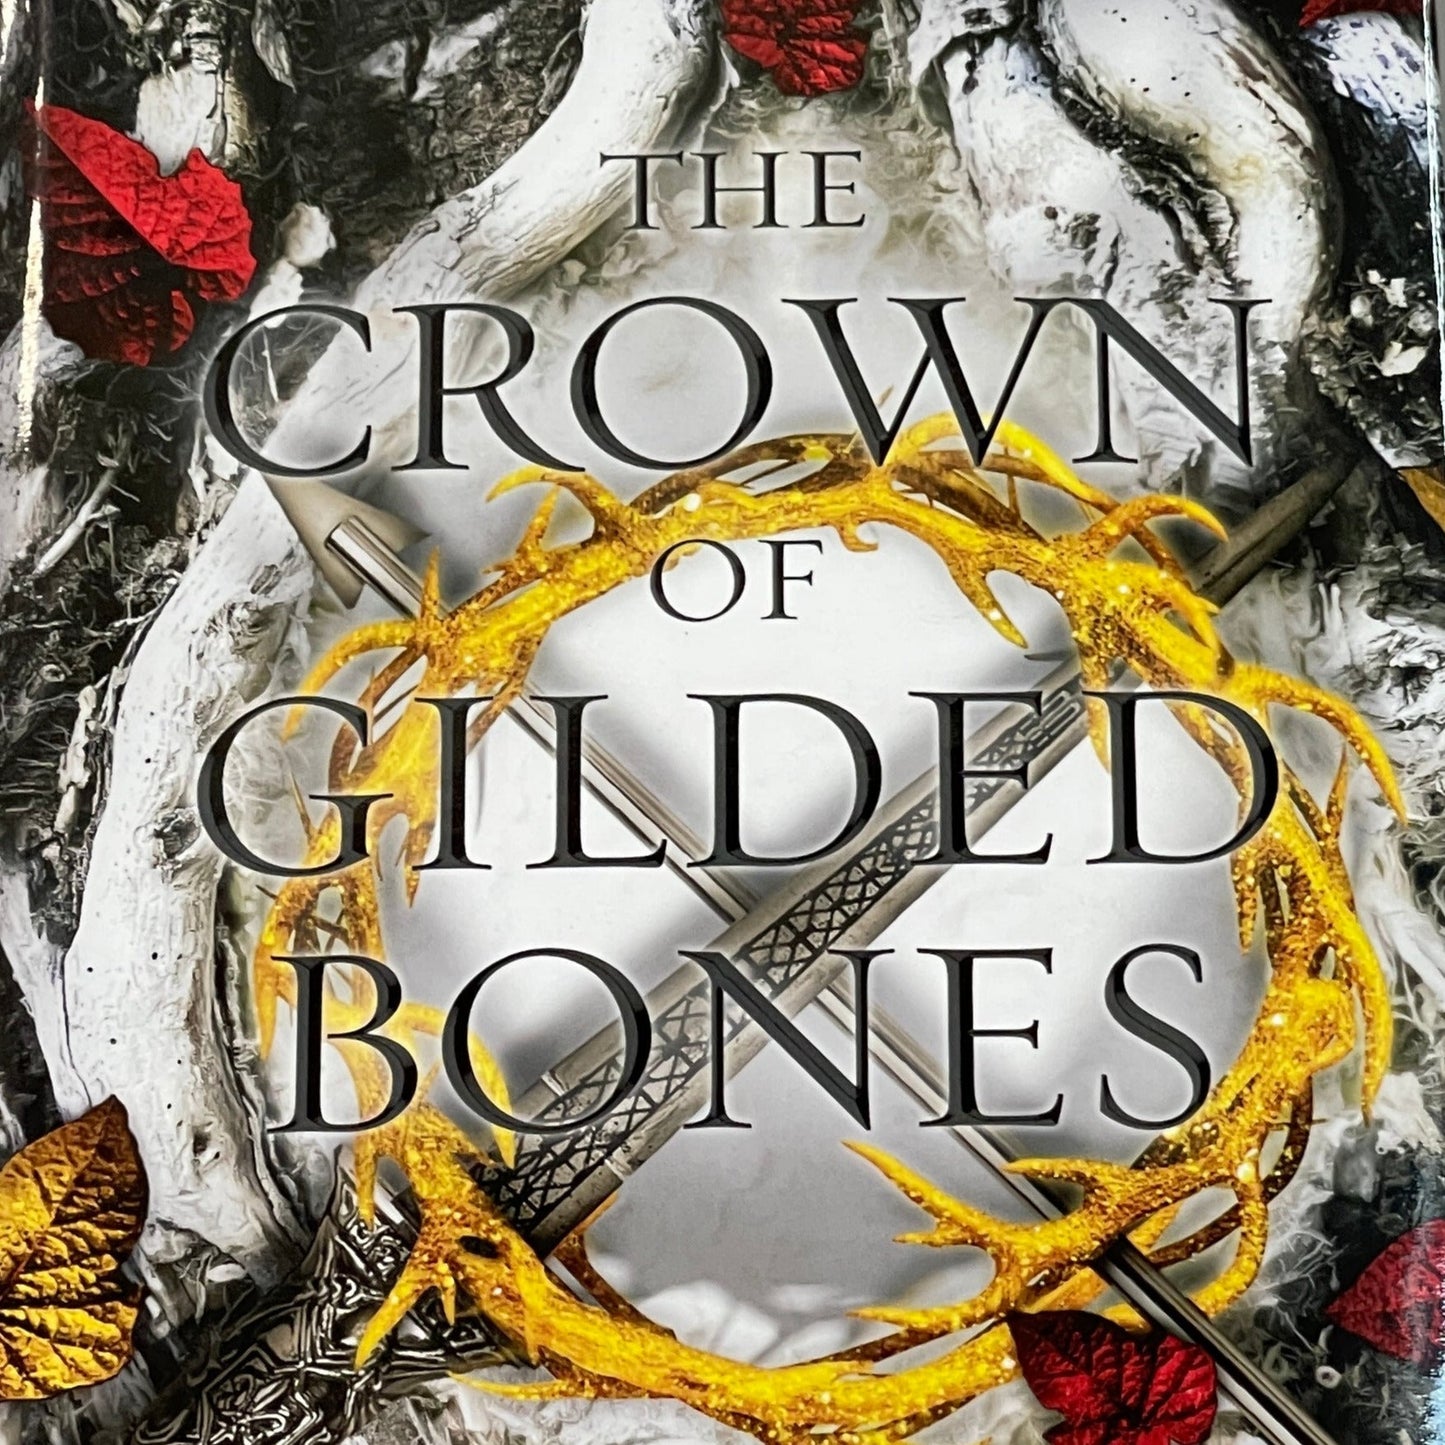 ZA@ THE CROWN OF GILDED BONES (Blood and Ash, 3) Hardcover Jennifer L. Armentrout (New Other)